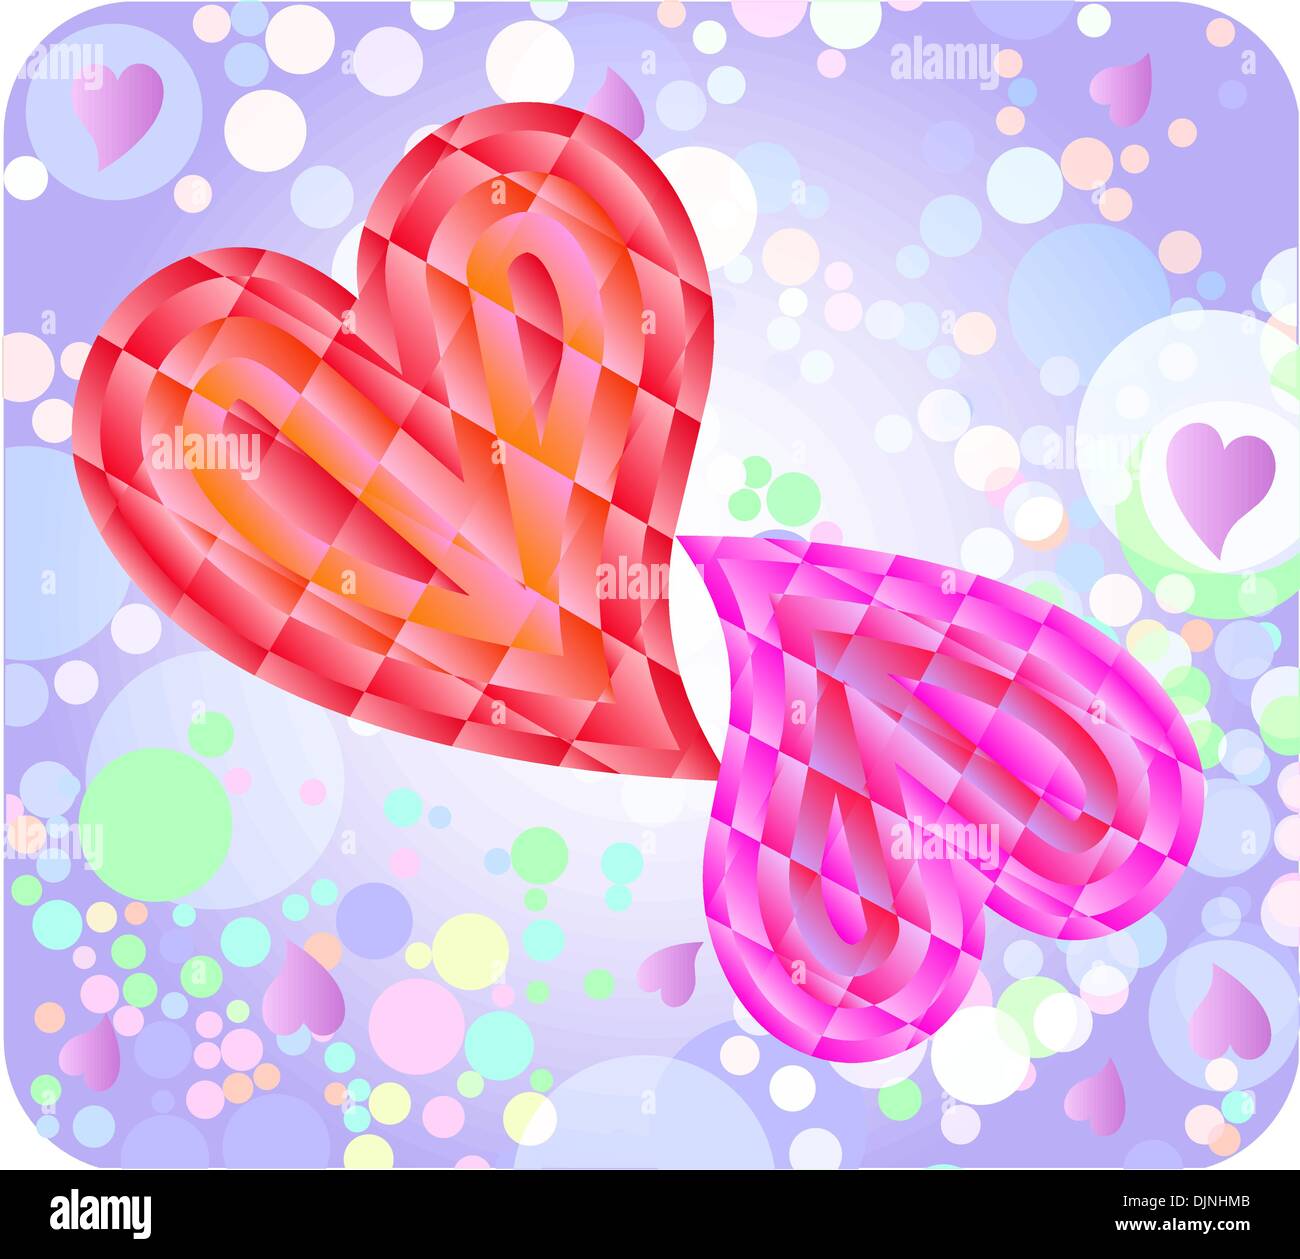 two hearts against colorful background Stock Vector